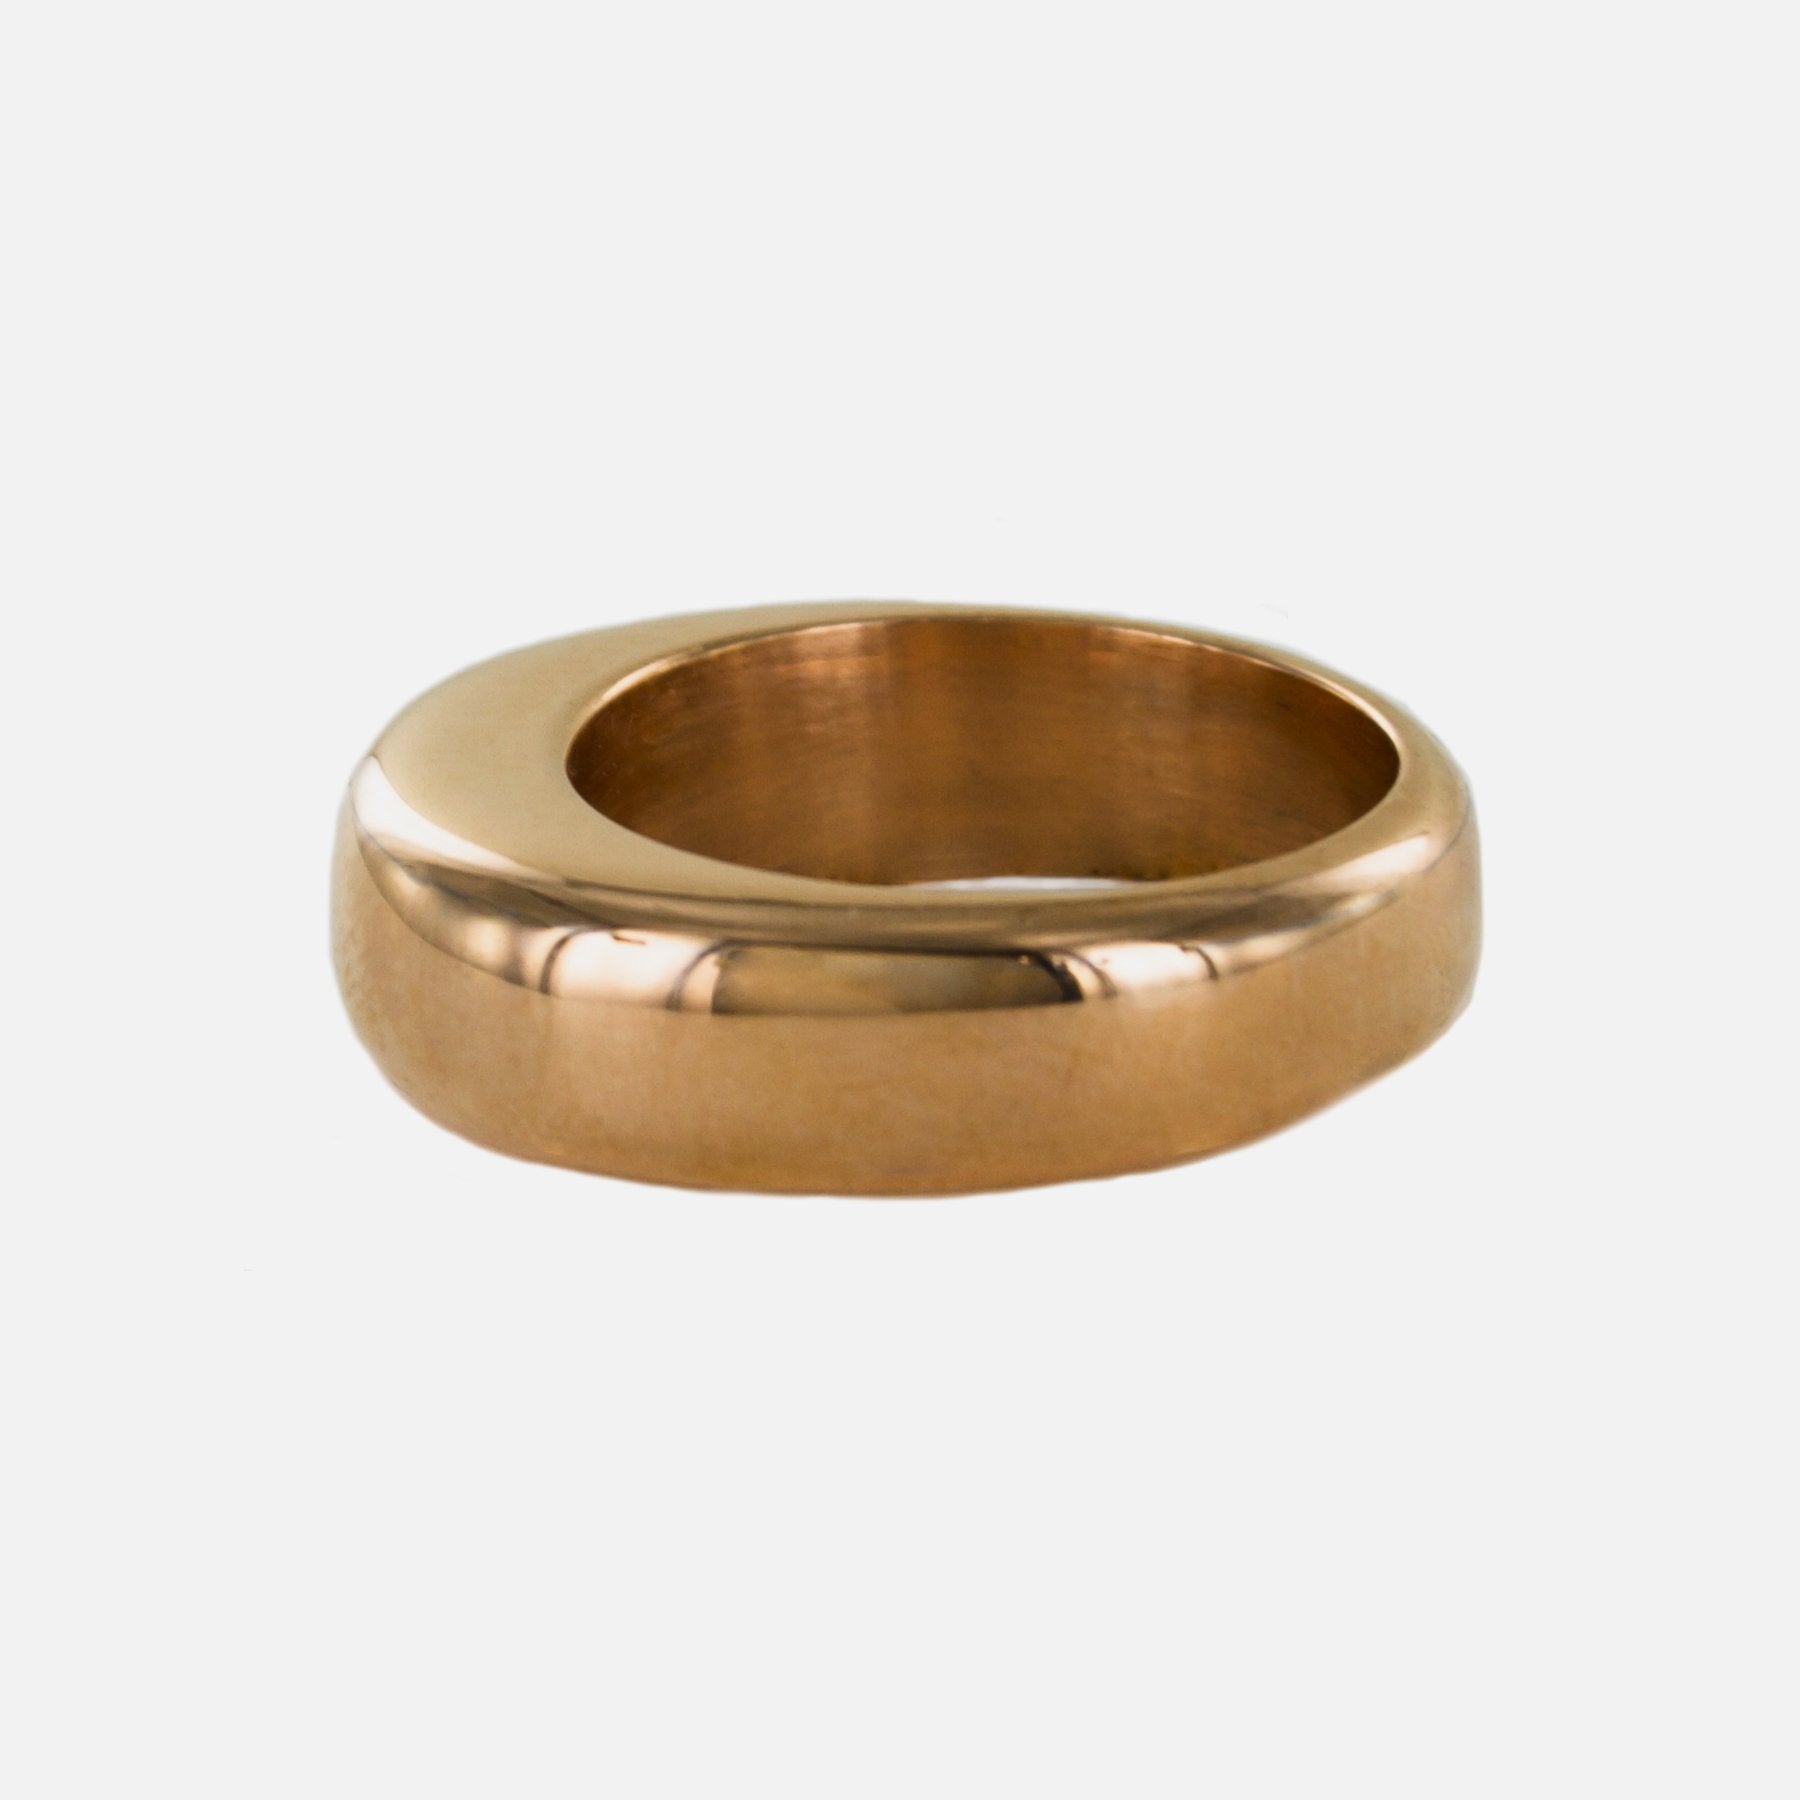 Hollow Copper Ring - 9